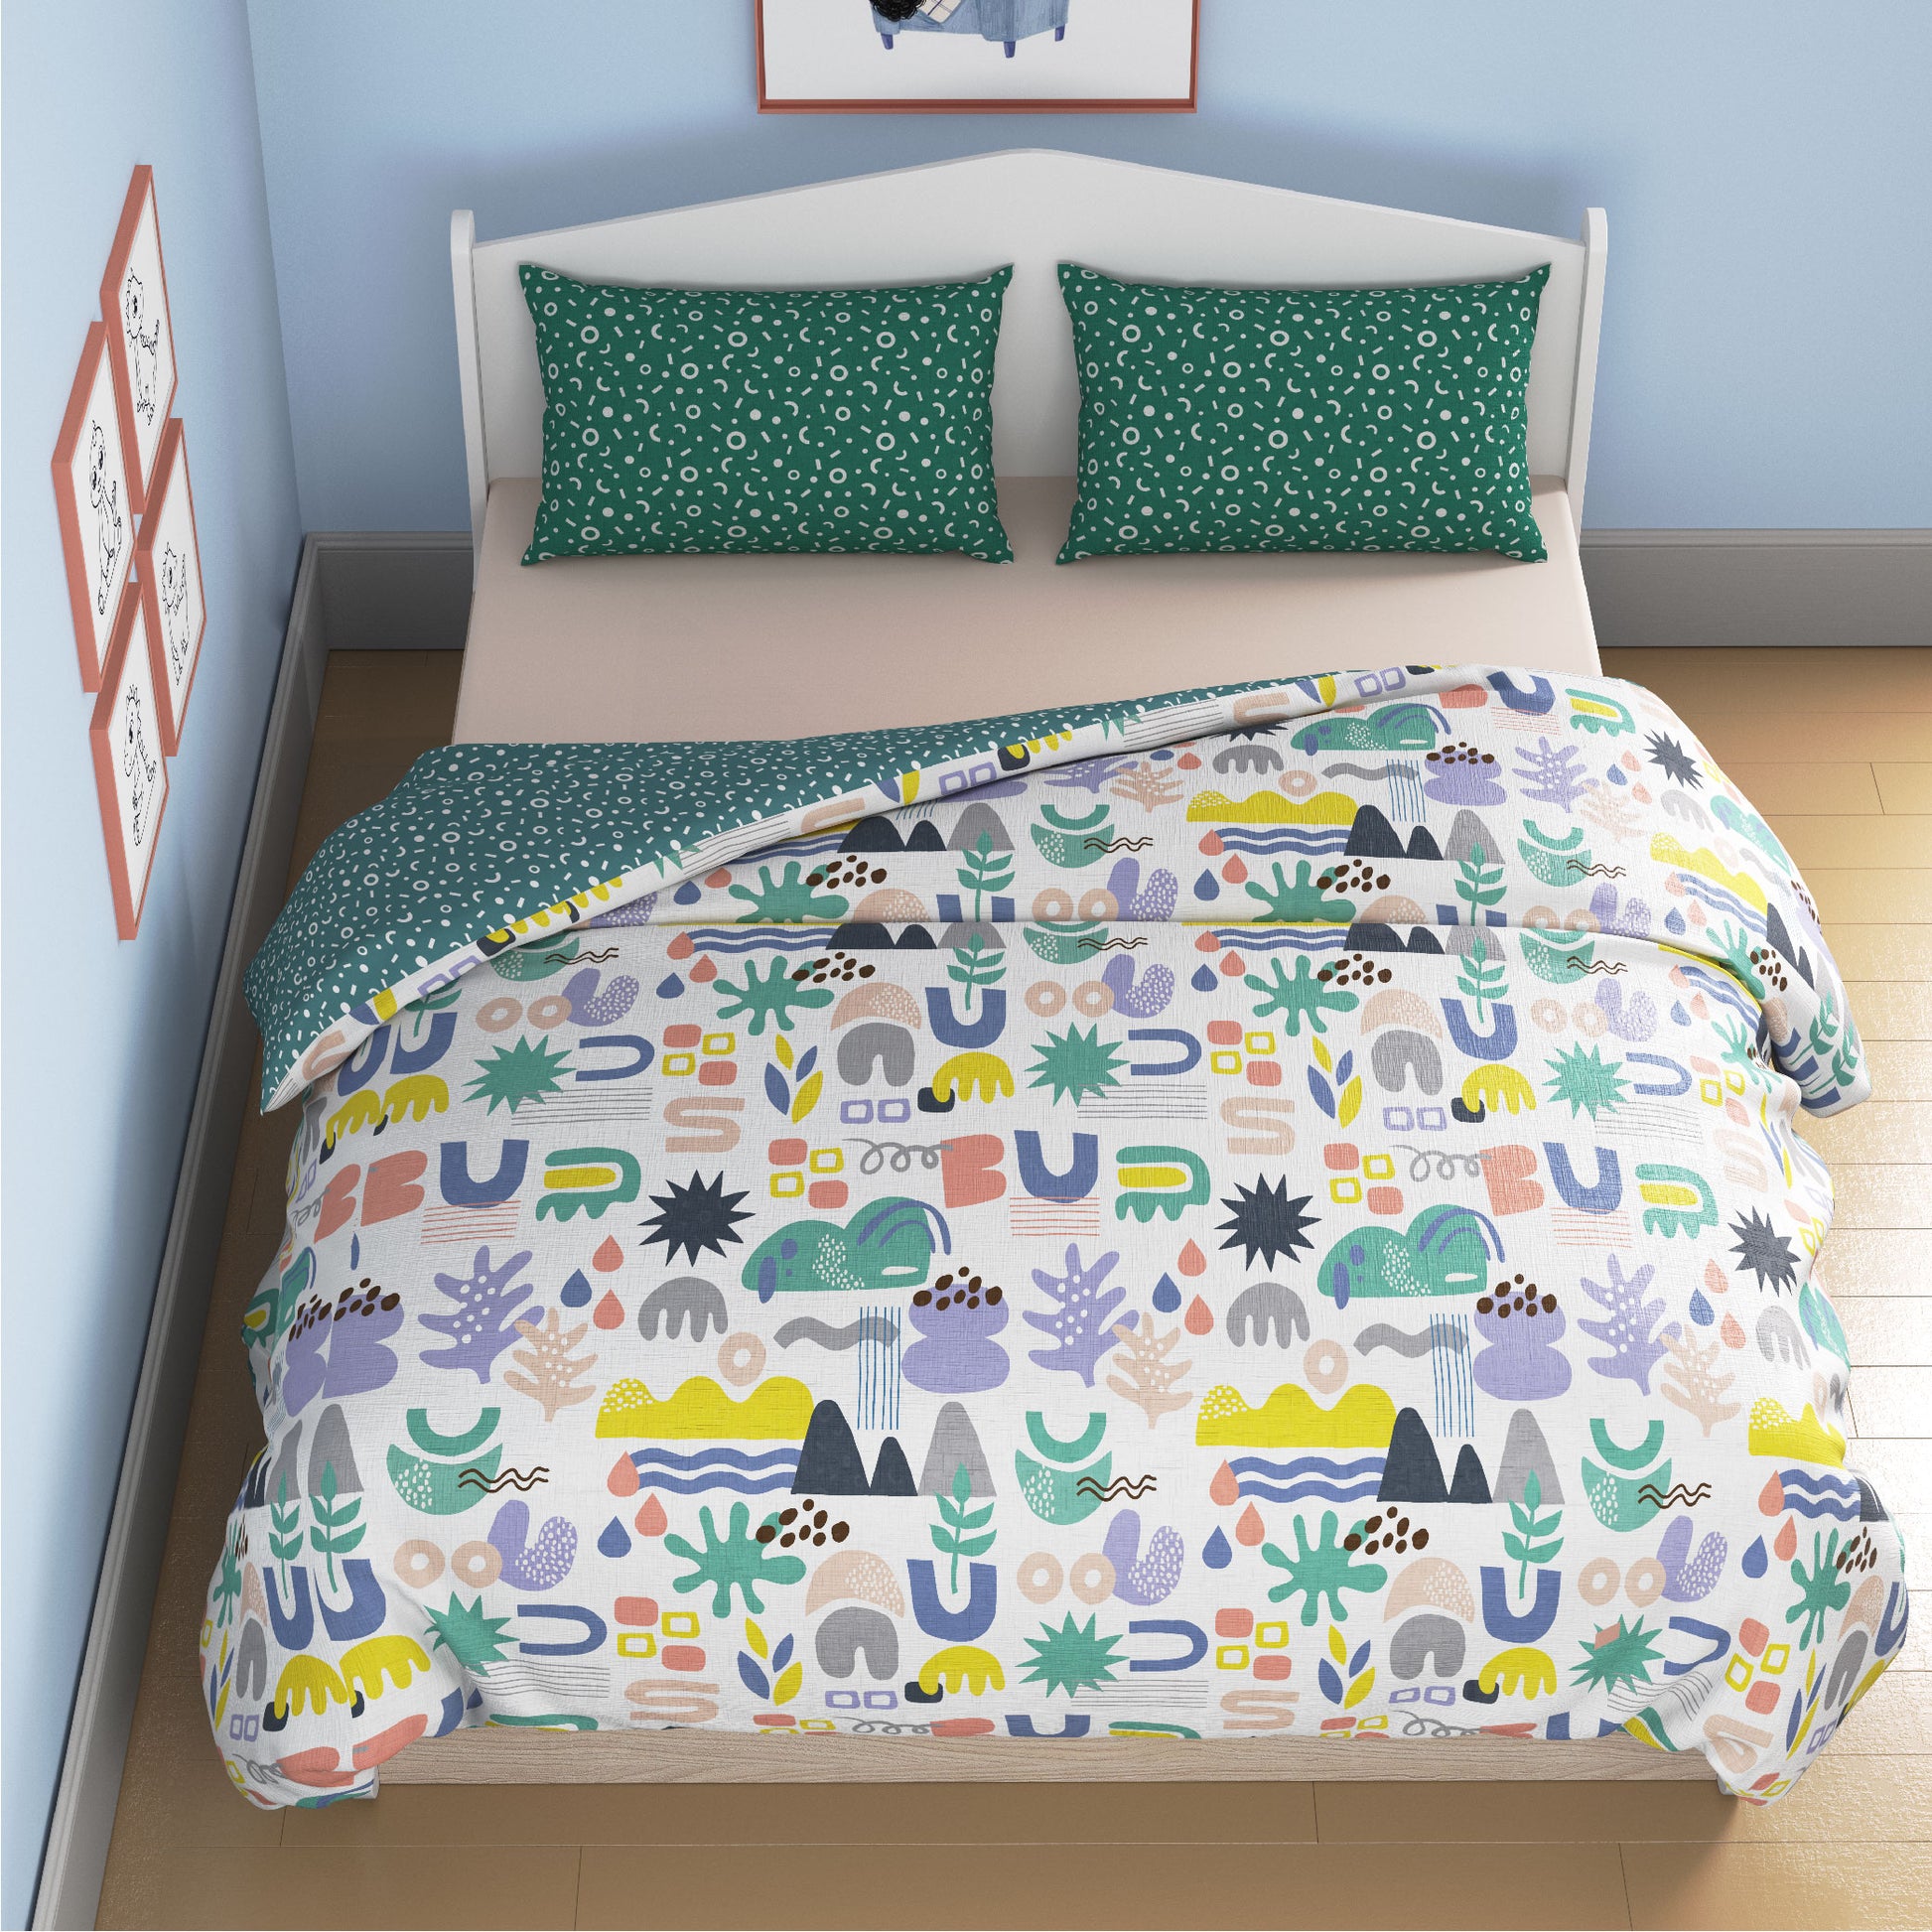 media_gallary Oodles of Doodles Reversible AC Comforter Queen Bed Size 2